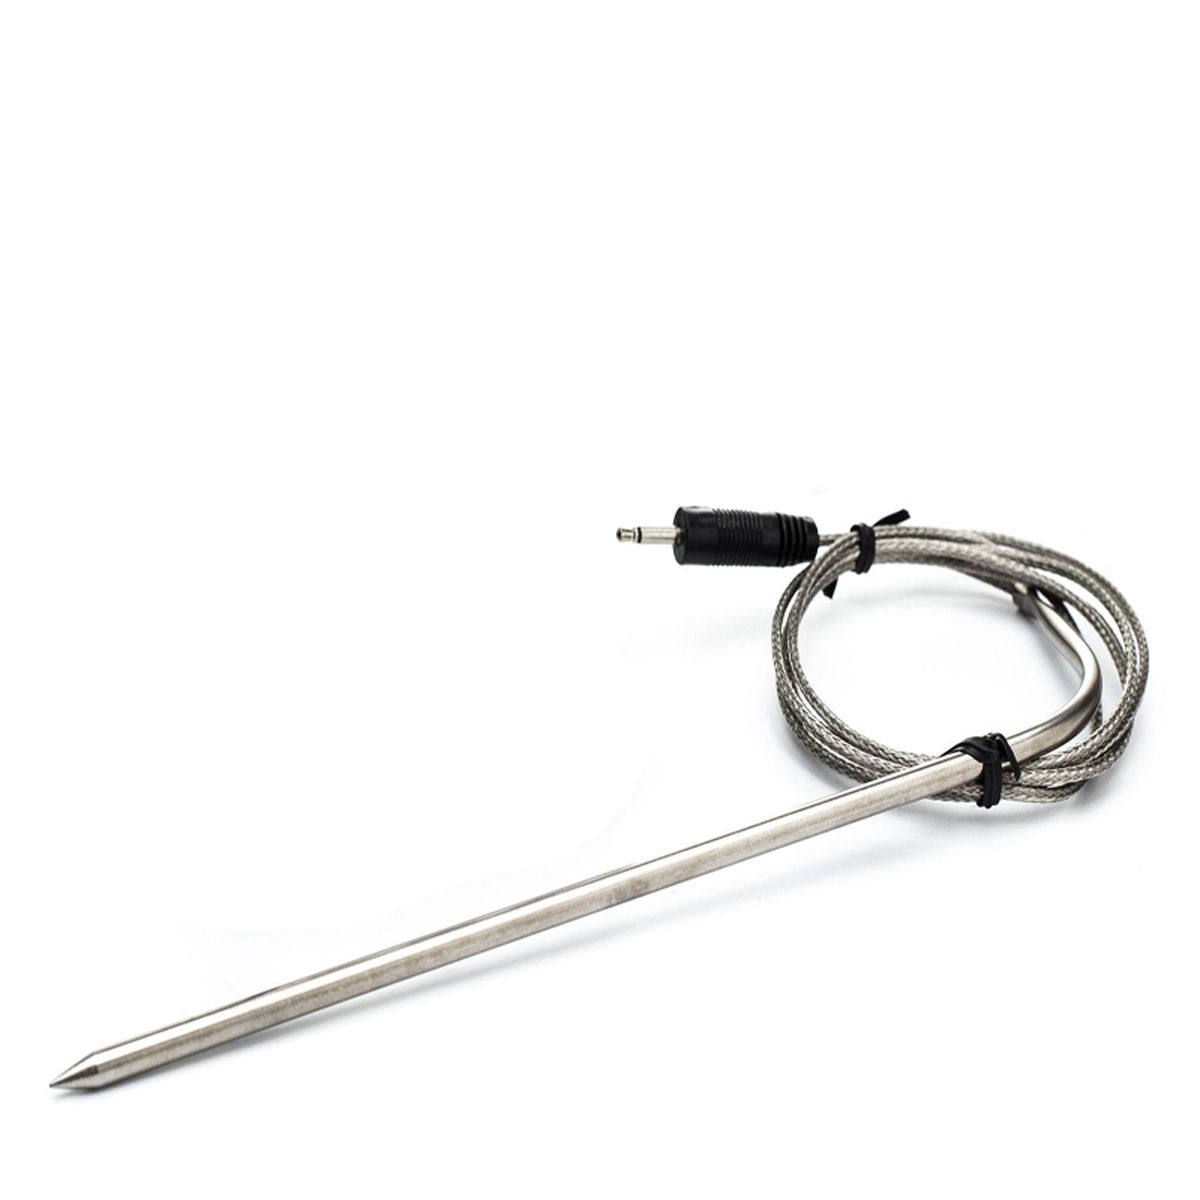 TS-BN50-Digital-Thermometer-0-300-Thermometer-With-Timer-And-Stainless-Steel-Probe-1441081